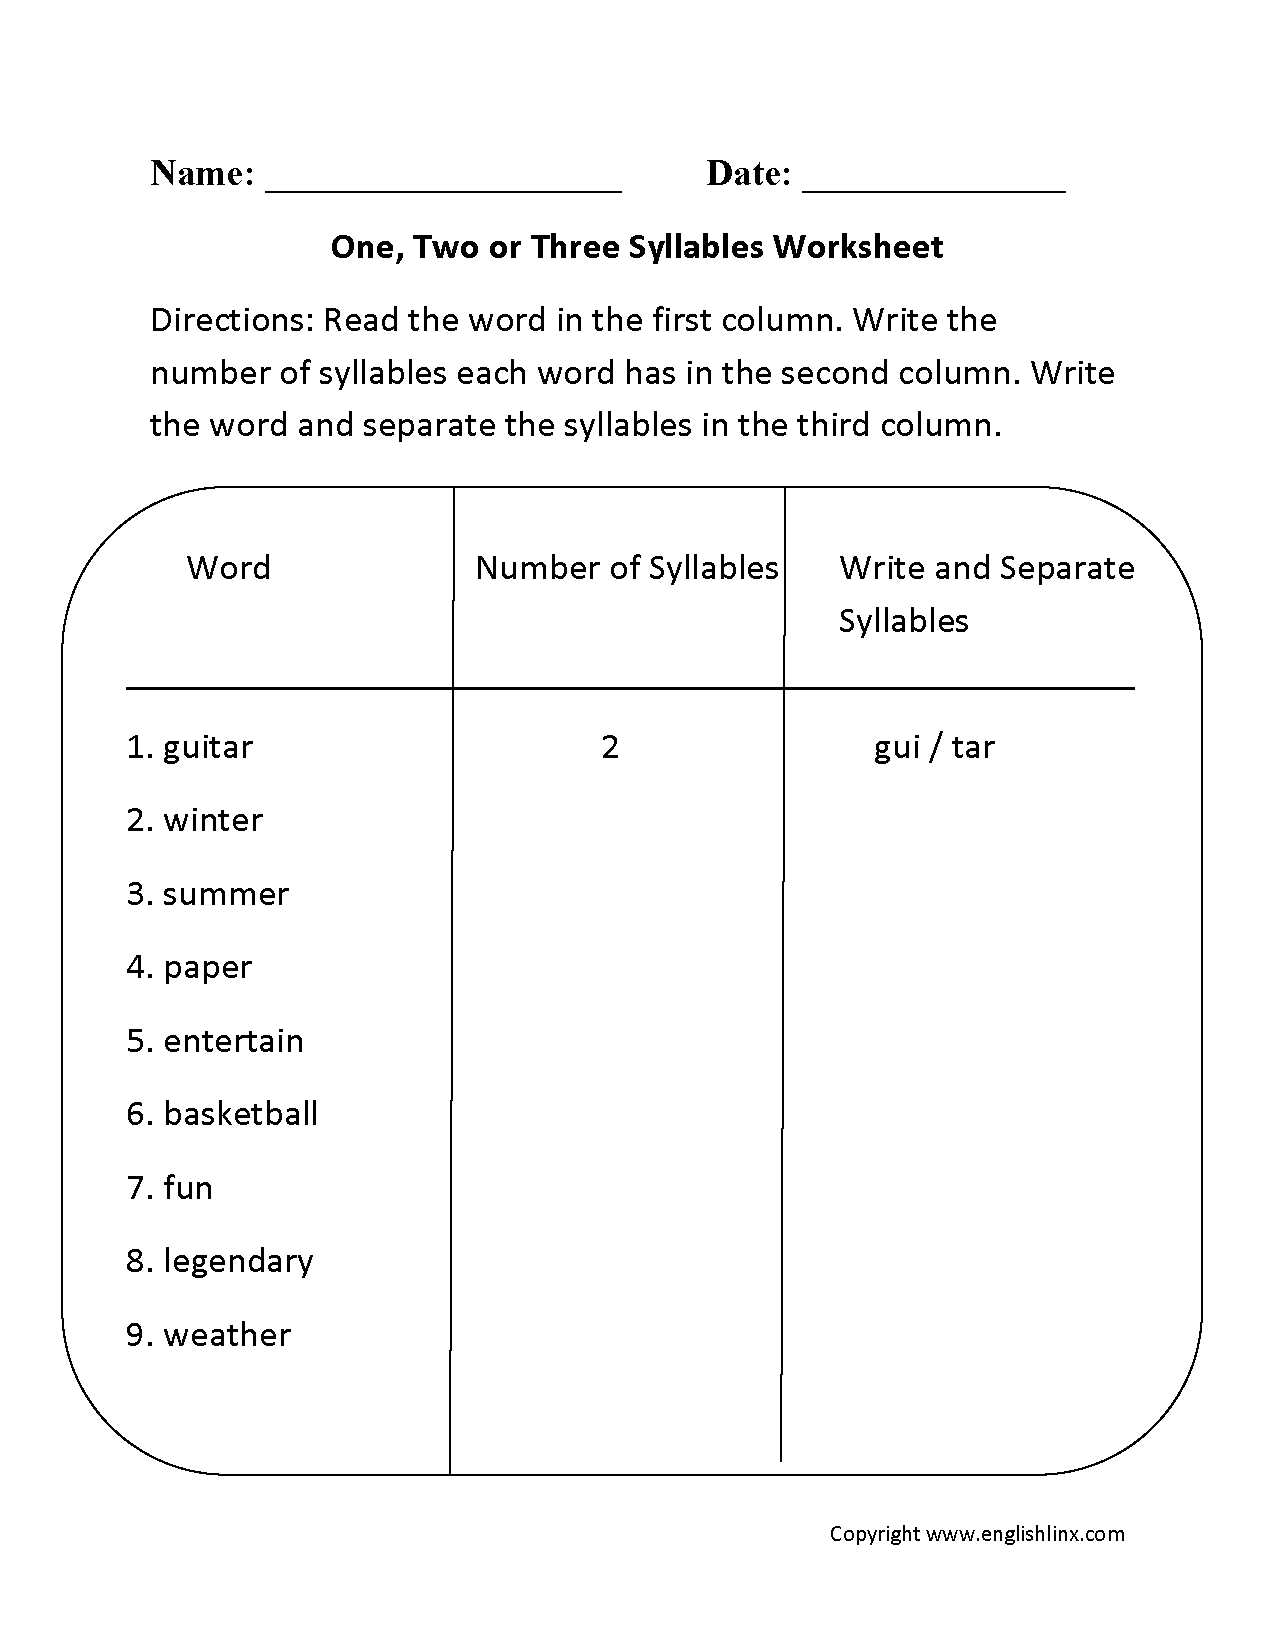 Banking Vocabulary Worksheet Along with E Two or Three Syllables Worksheet Syllable Type